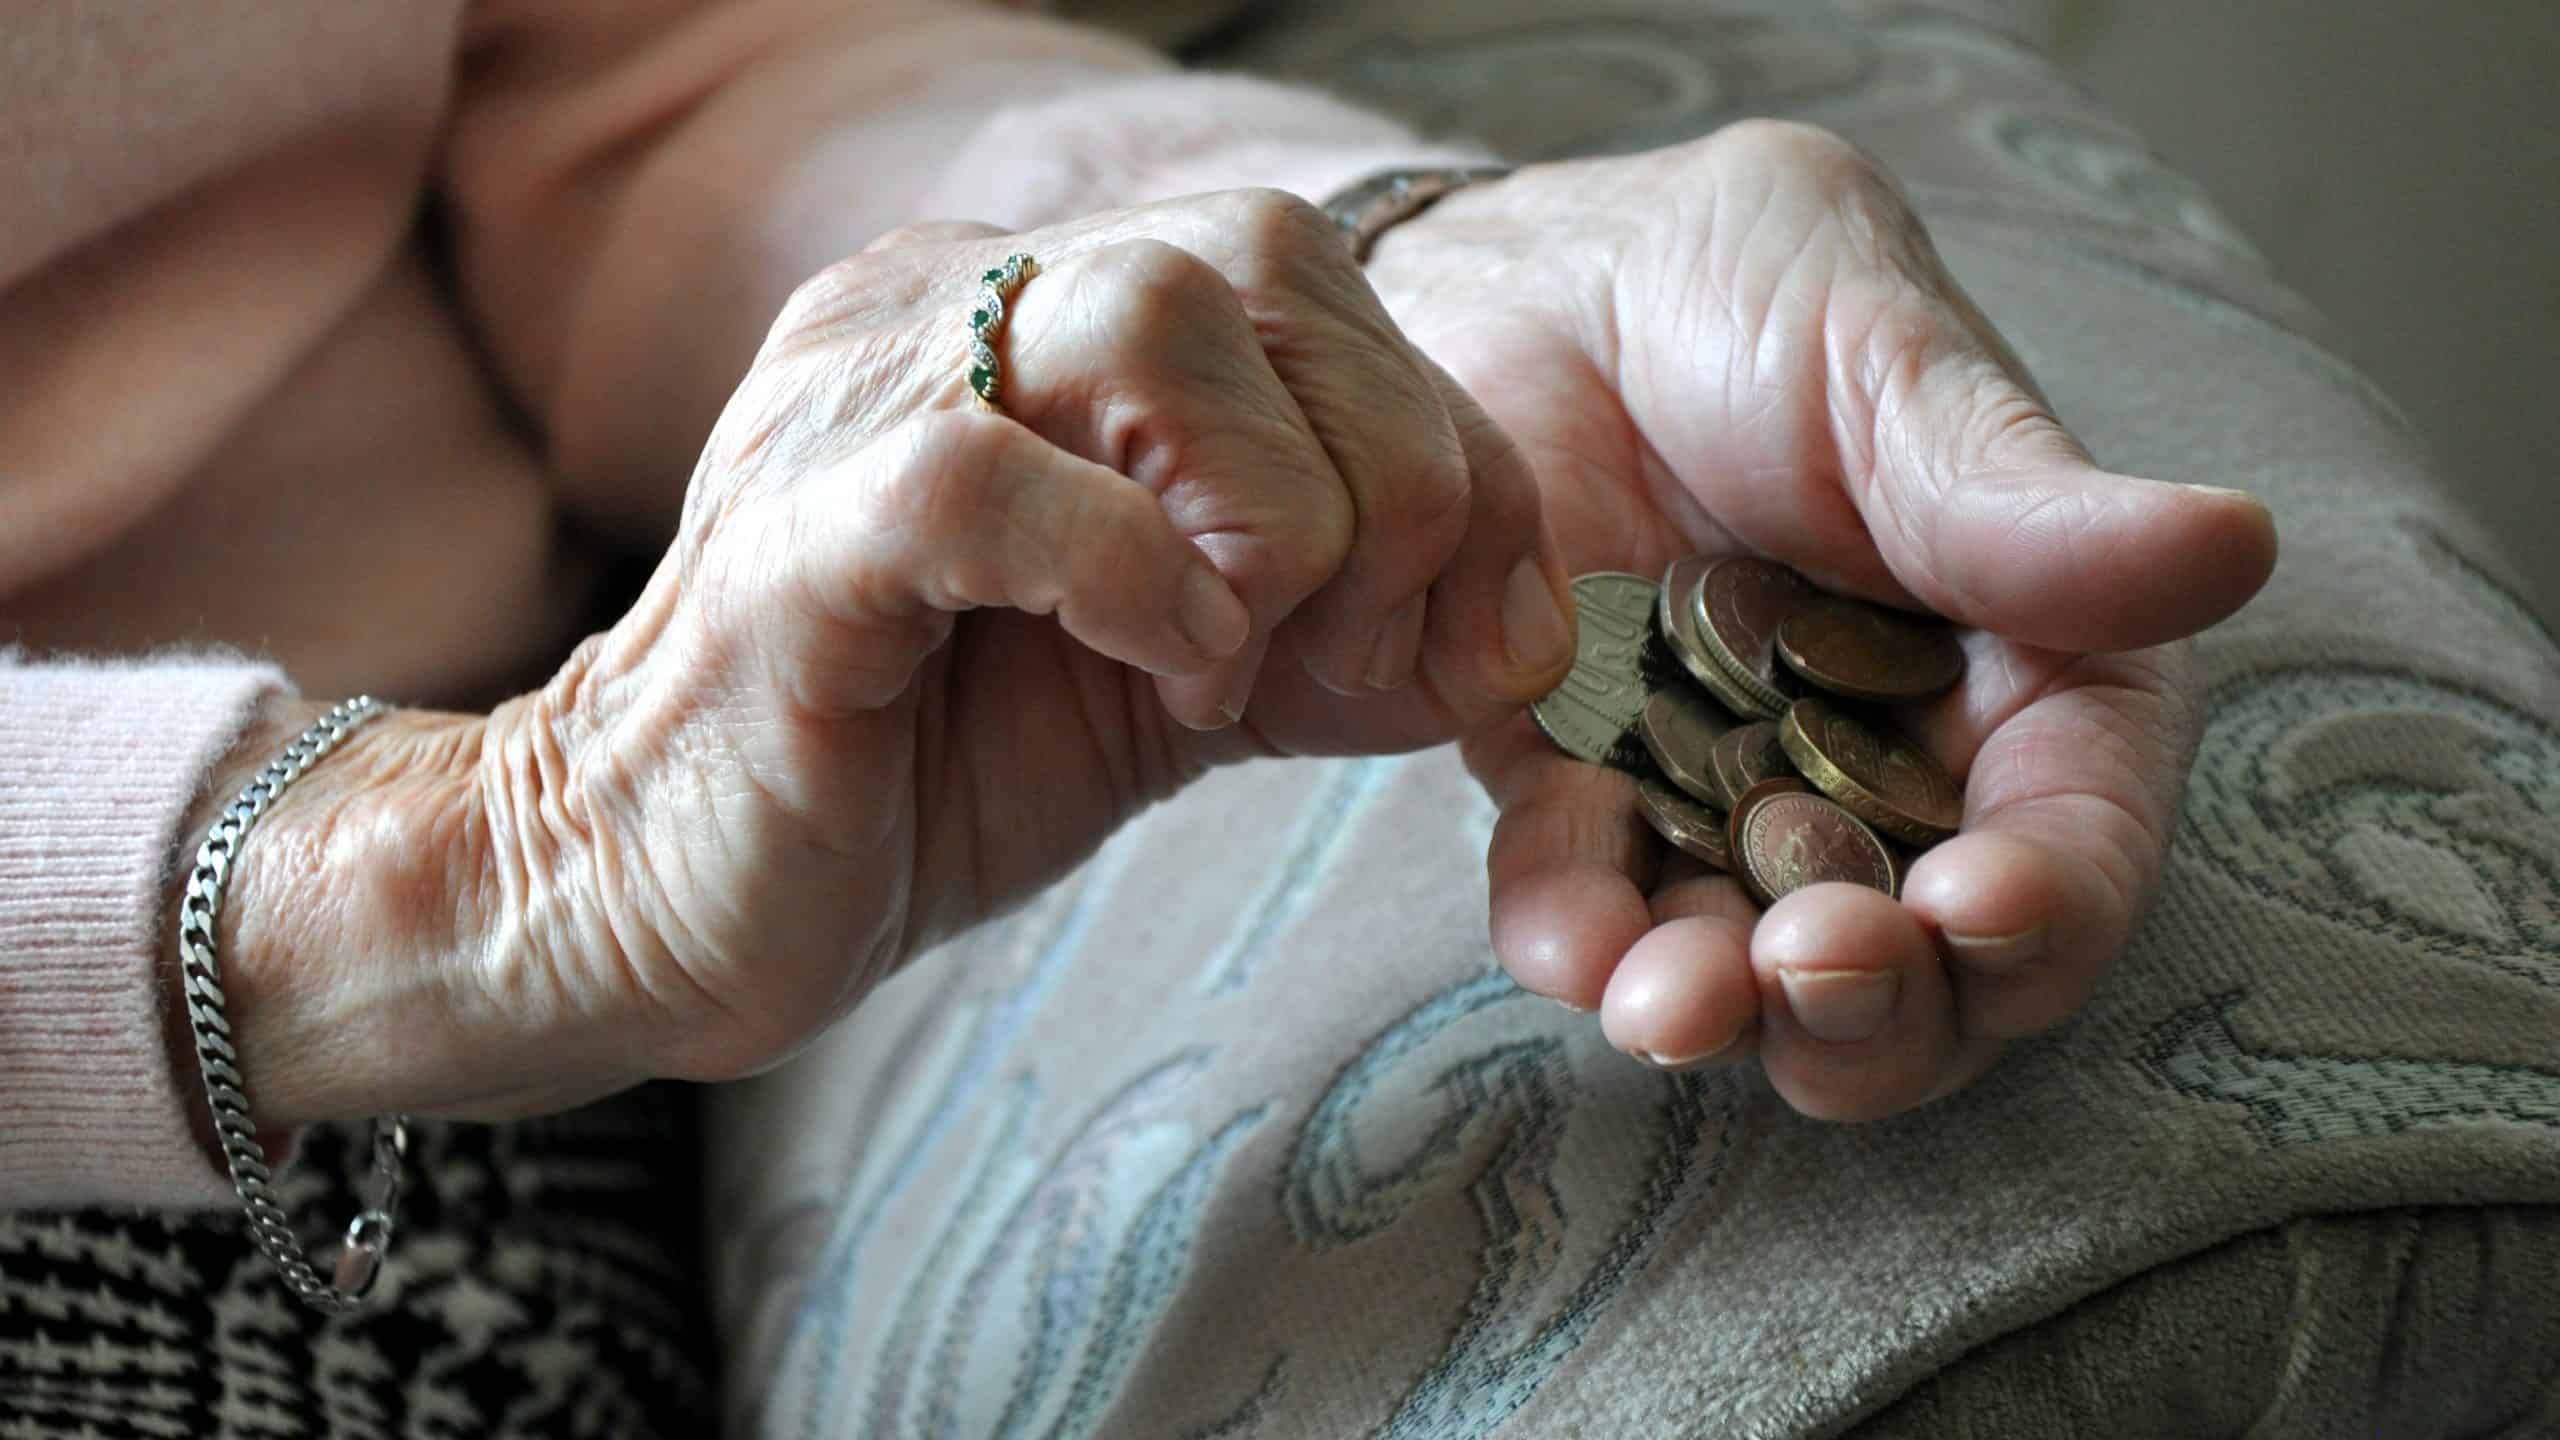 4.5 million people in ‘deep poverty’ in UK – report